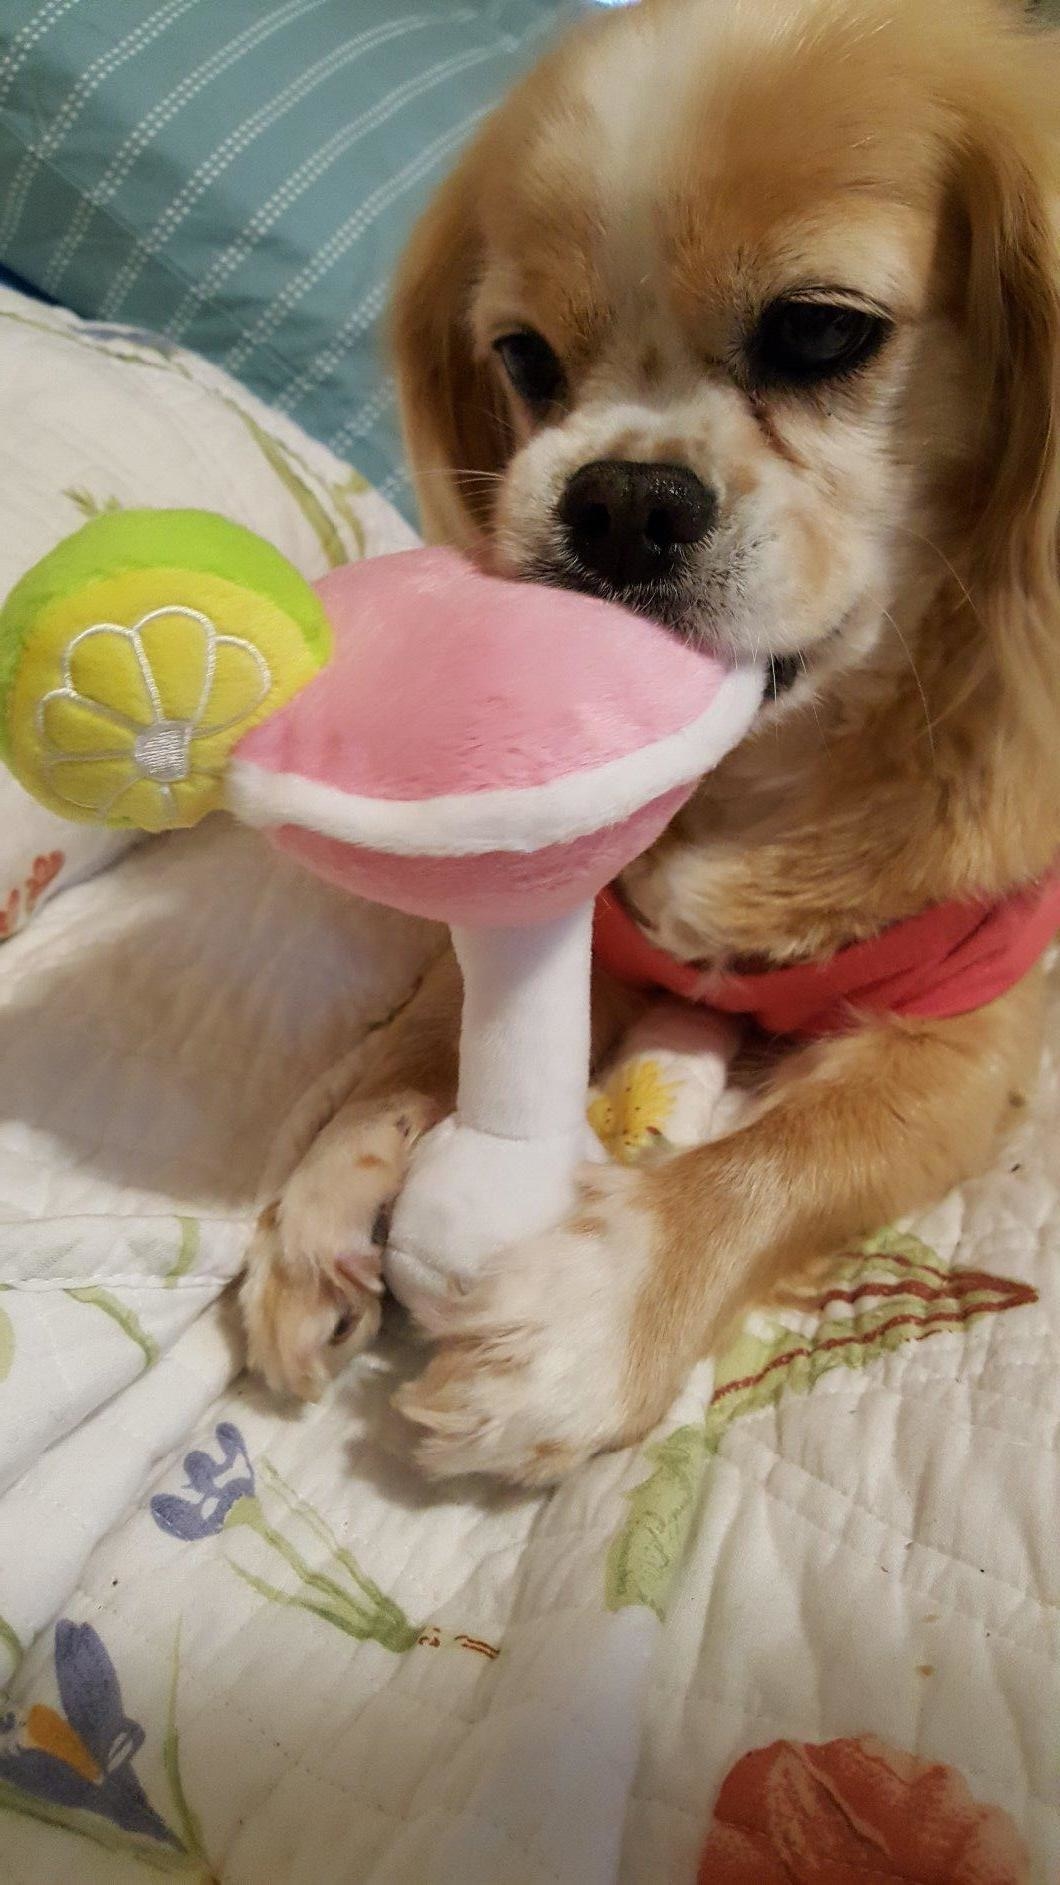 A dog chews on the plush toy, which looks like a highball glass filled with pink drink and 